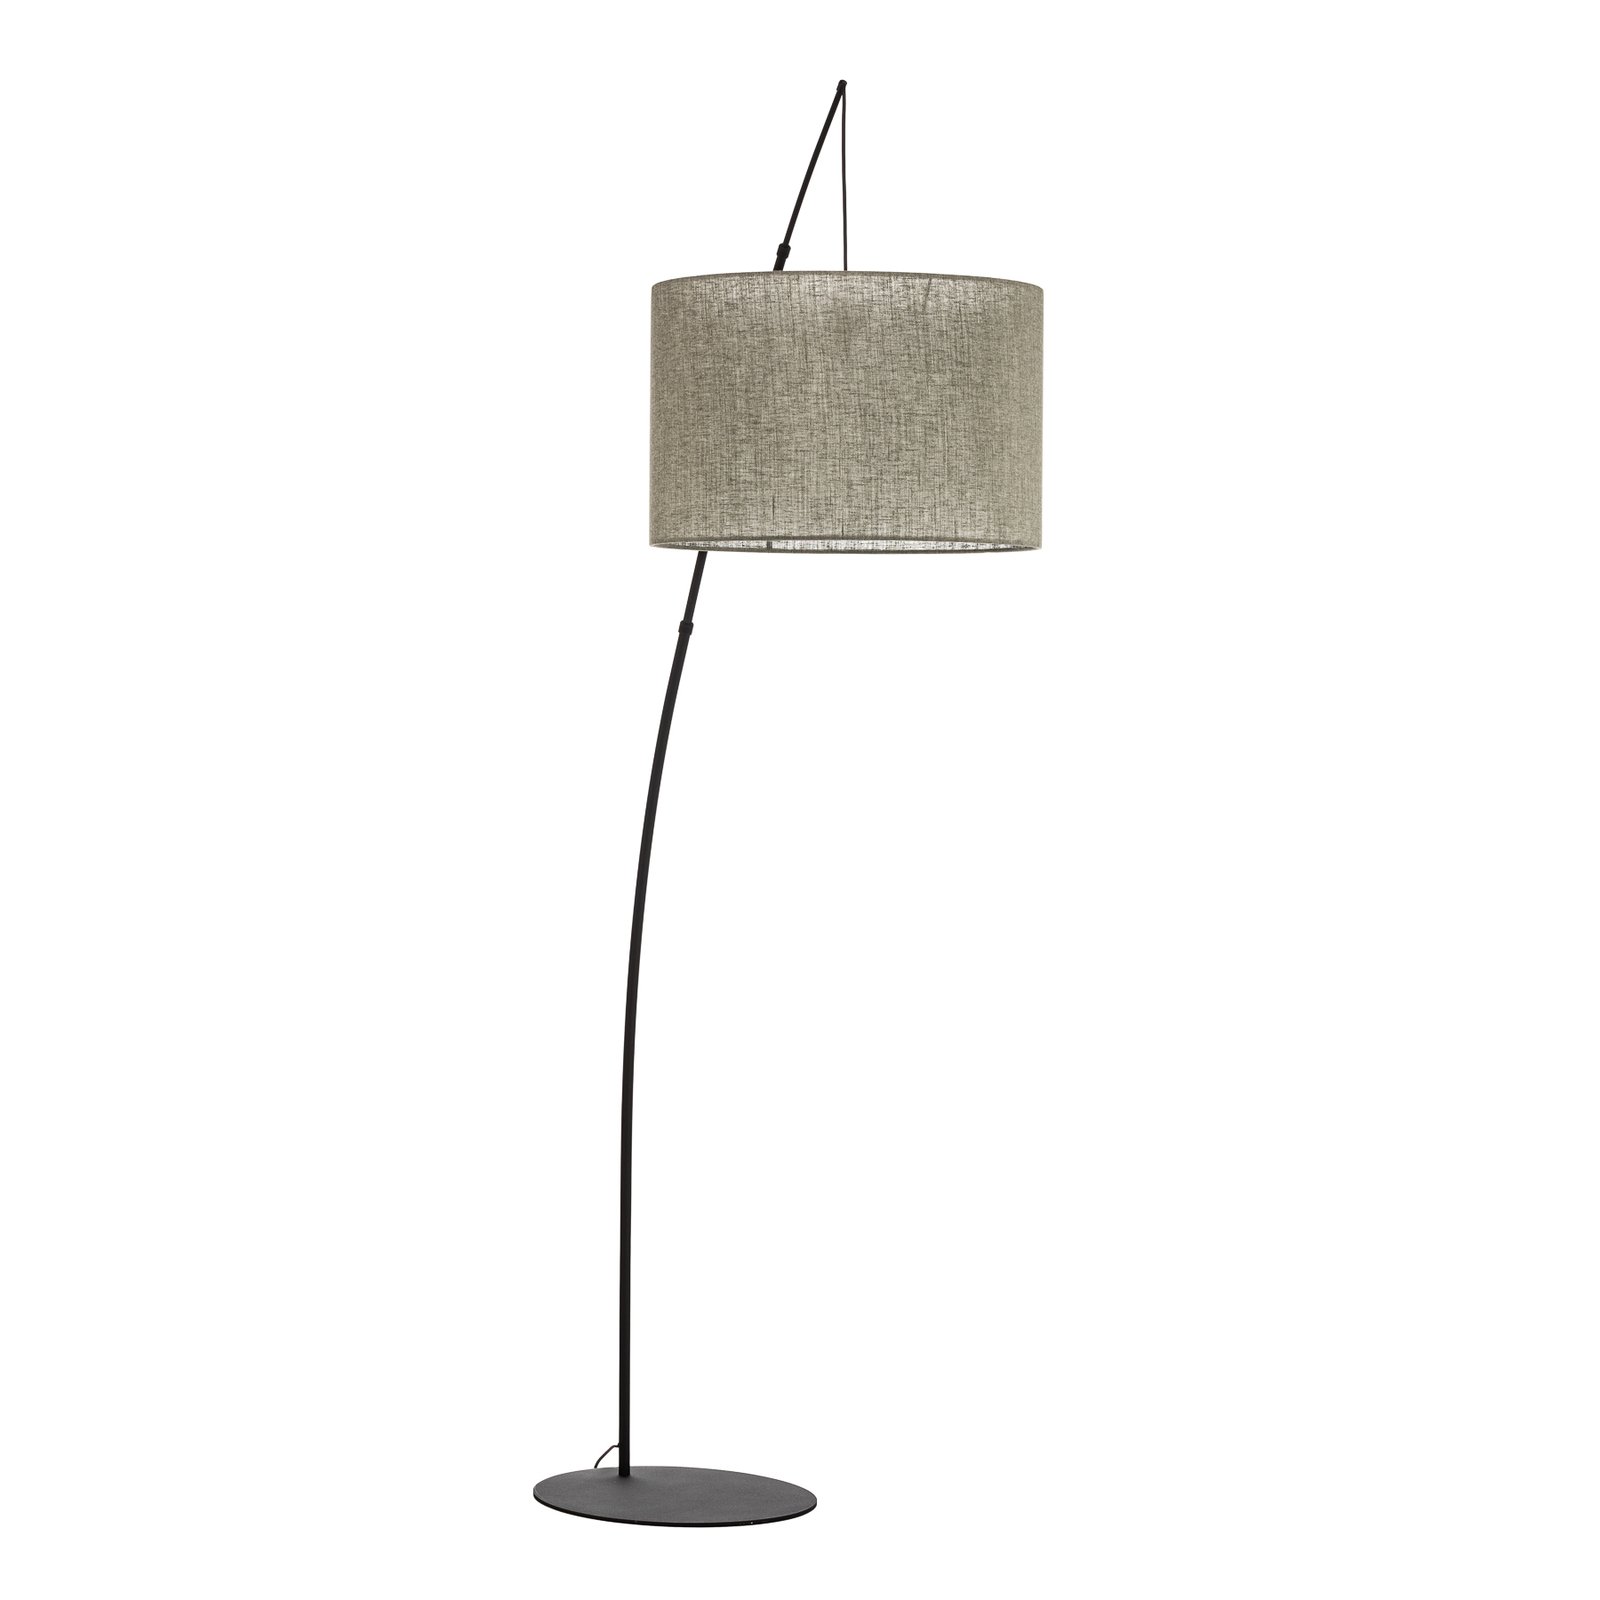 Moby Green textile floor lamp